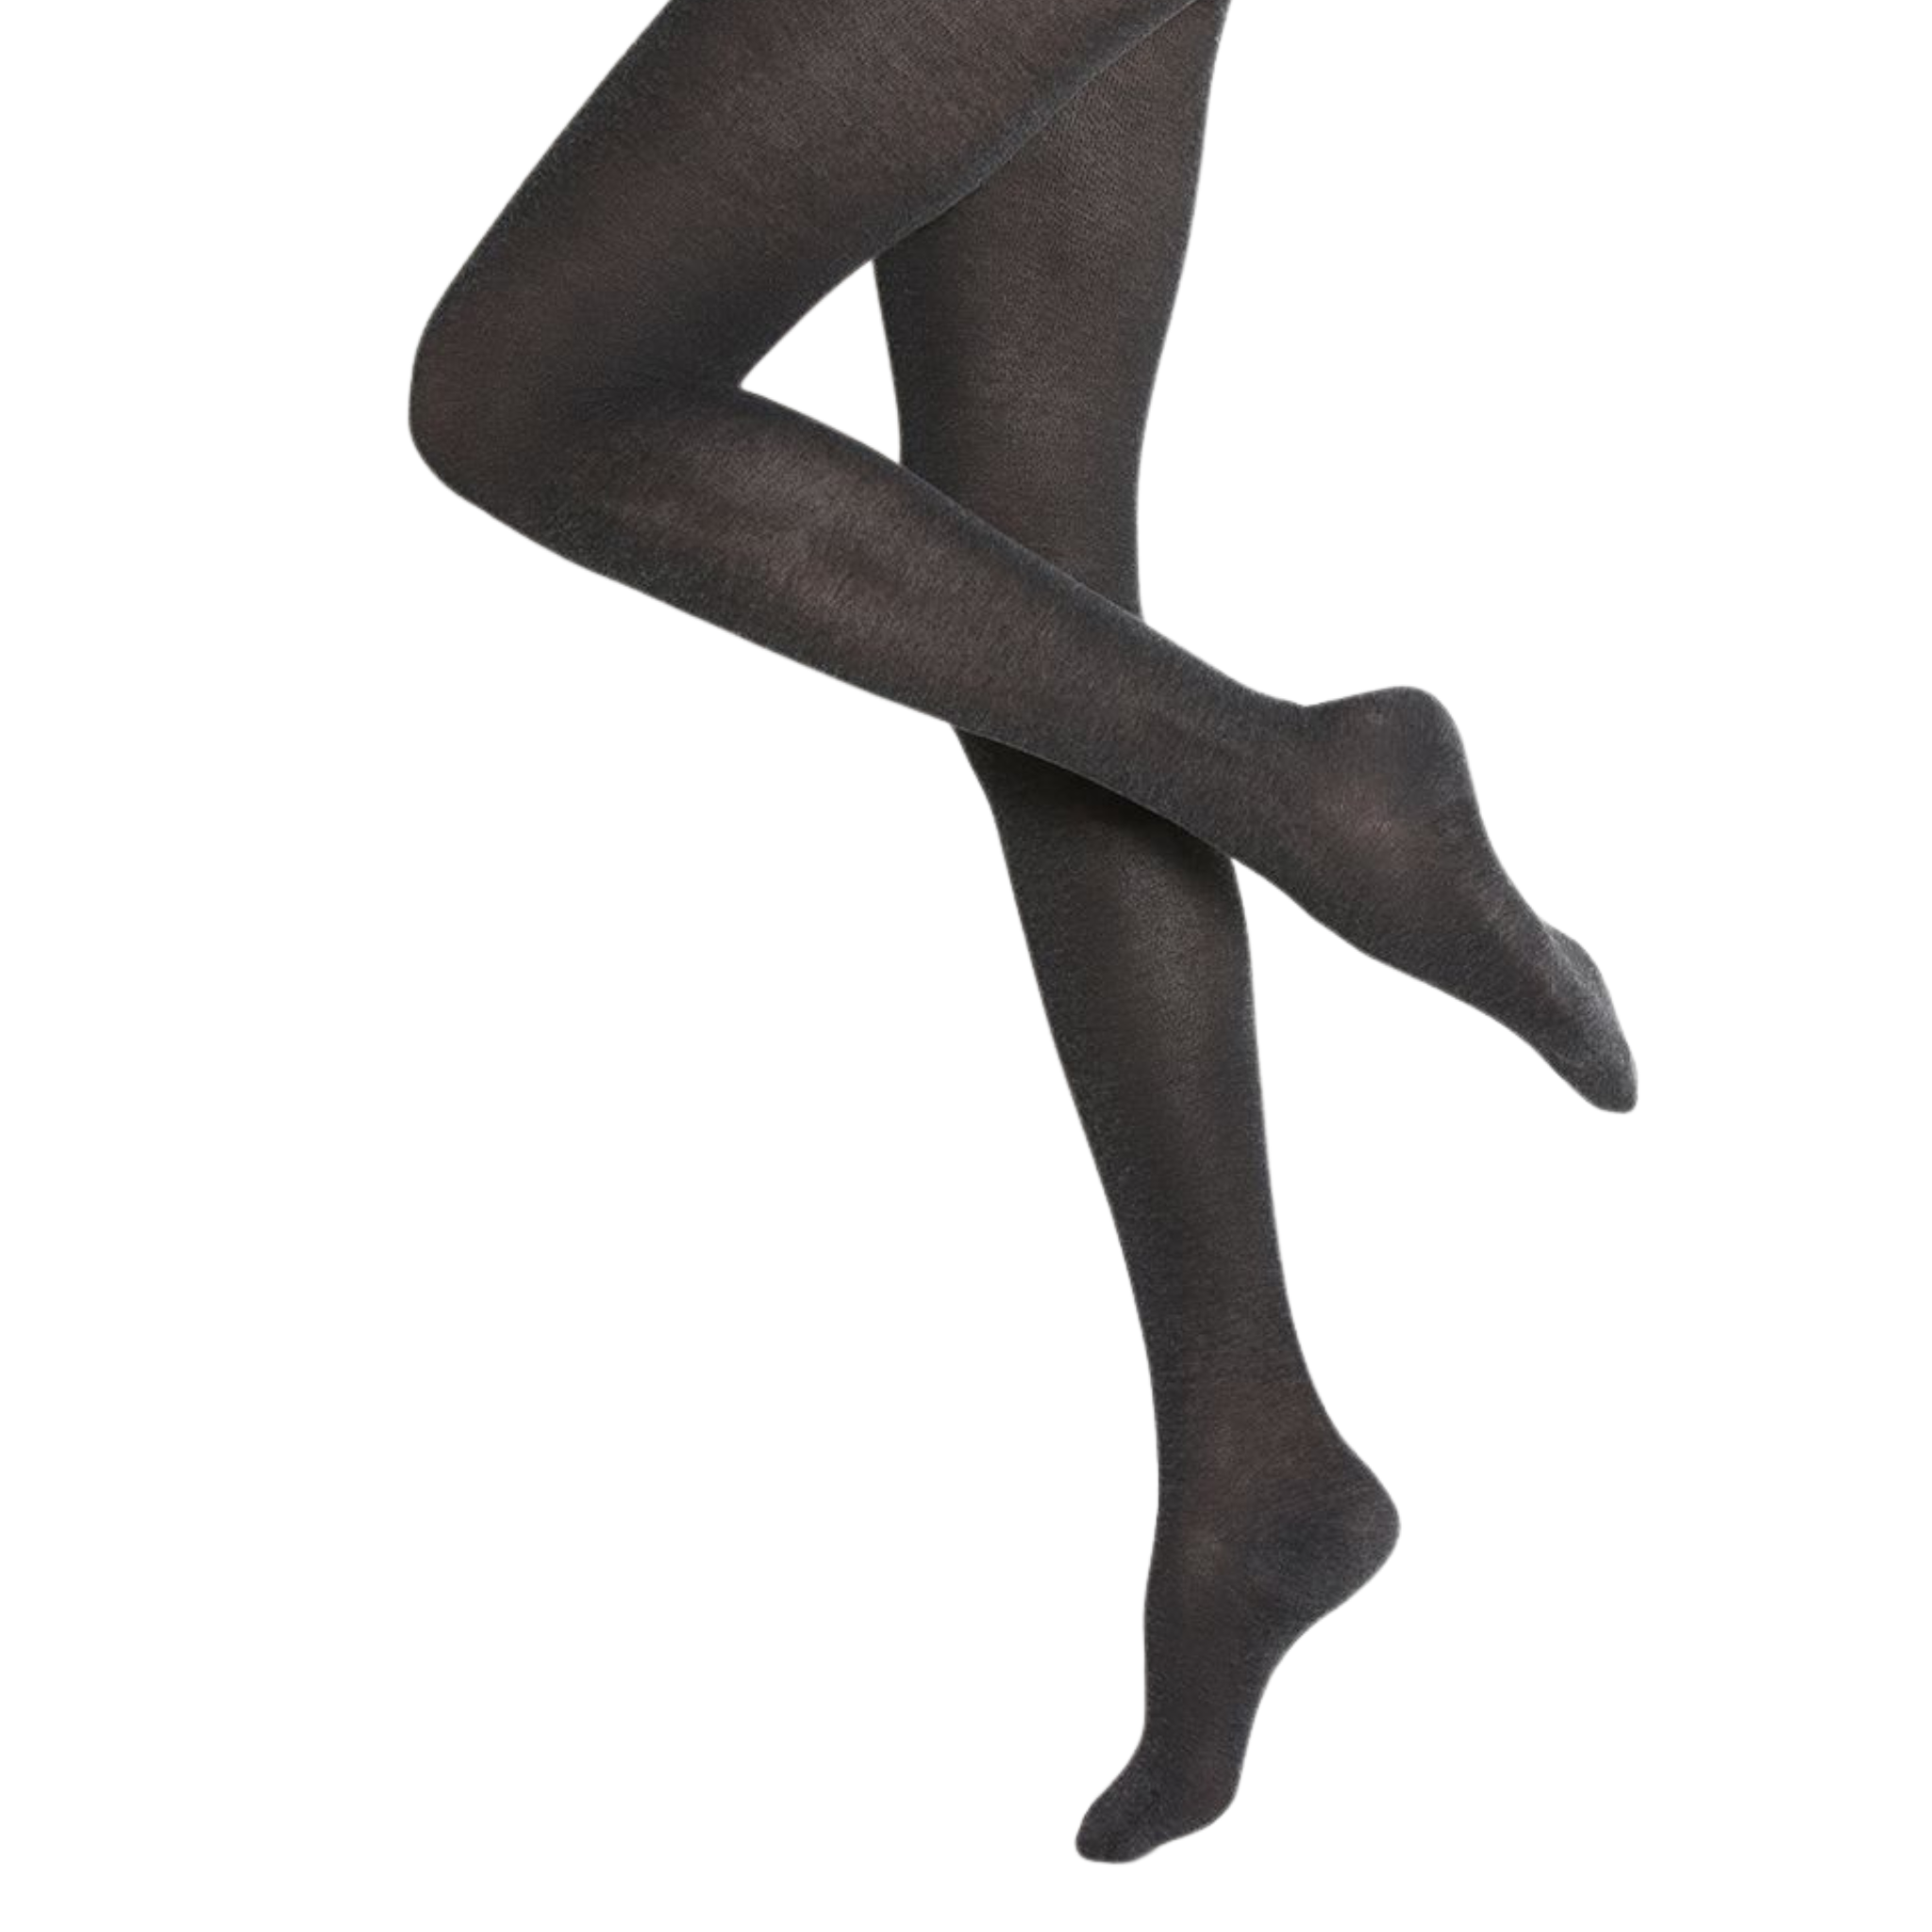 Plus Size Tights for Women Blue-black, Ombre SEMI-OPAQUE Pantyhose, Gift  Under 35 -  Canada